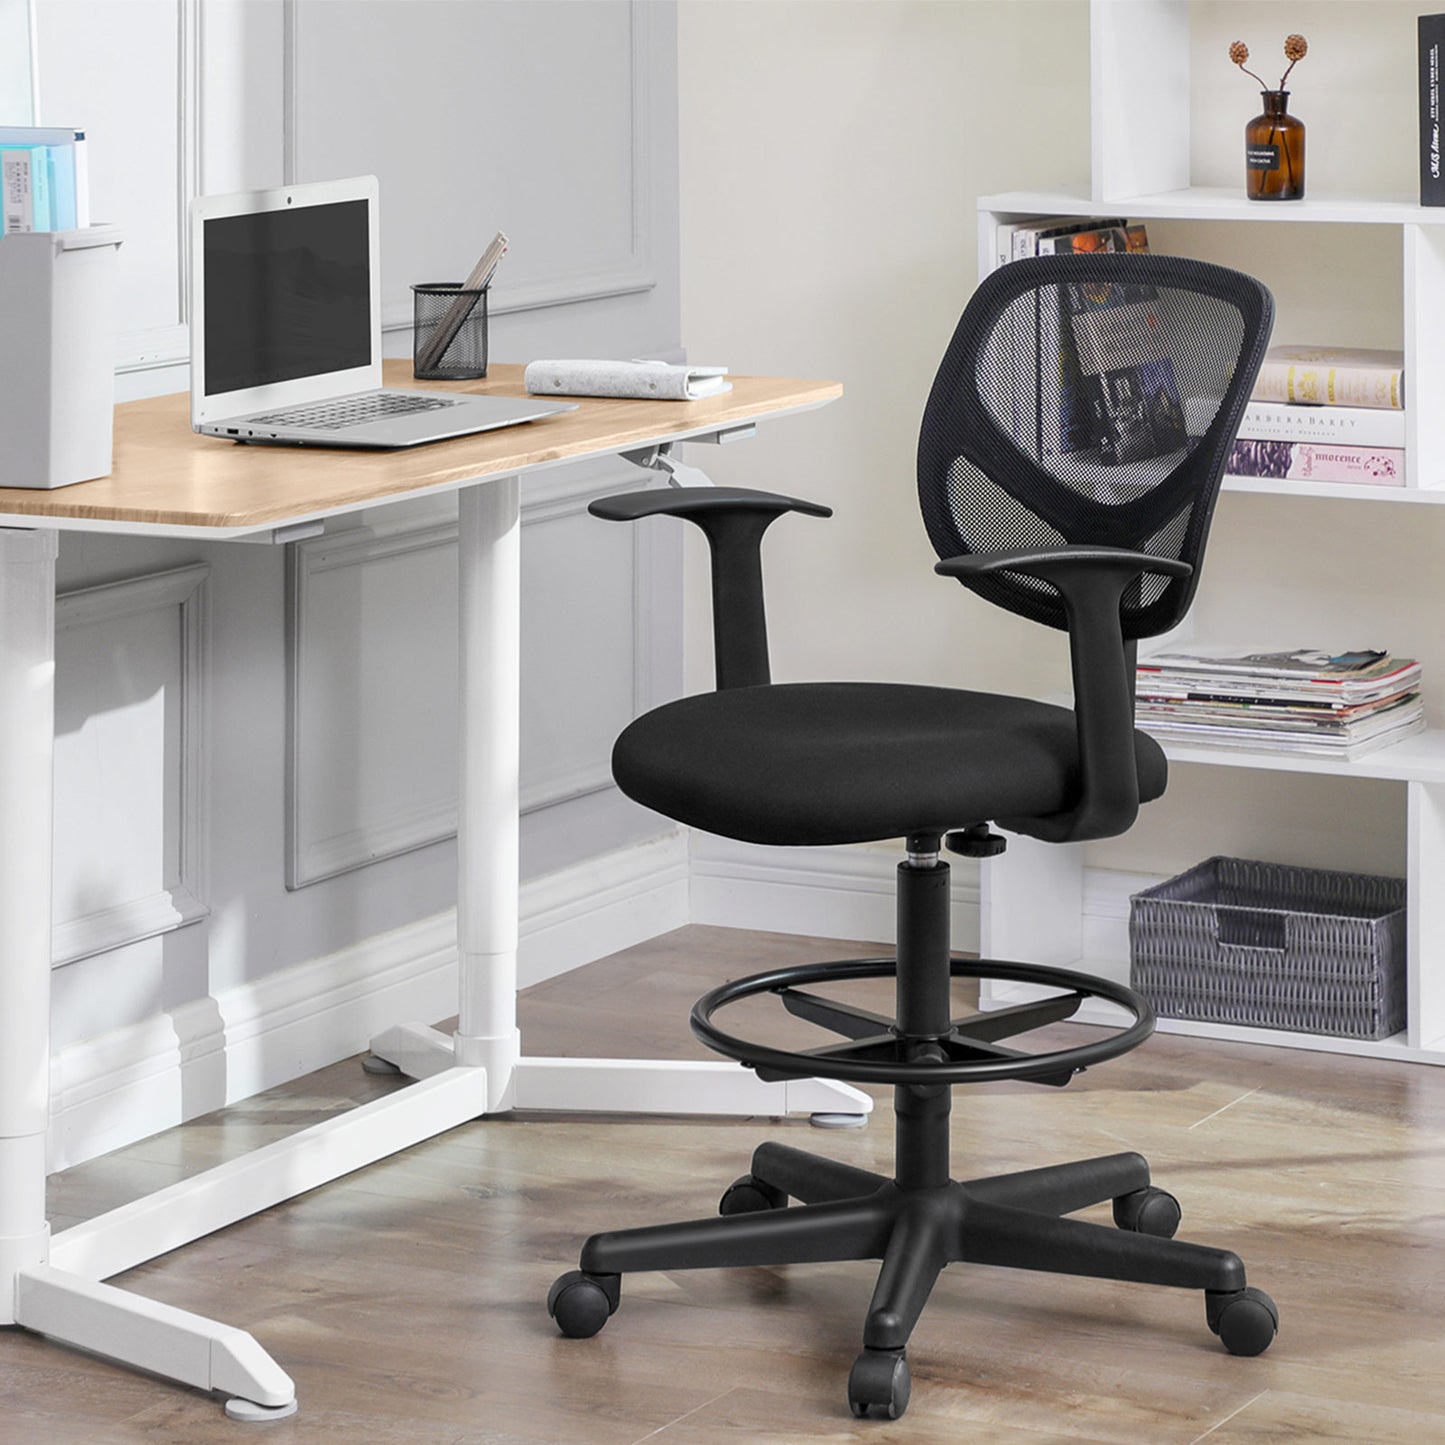 Ergonomic office chair with armrests